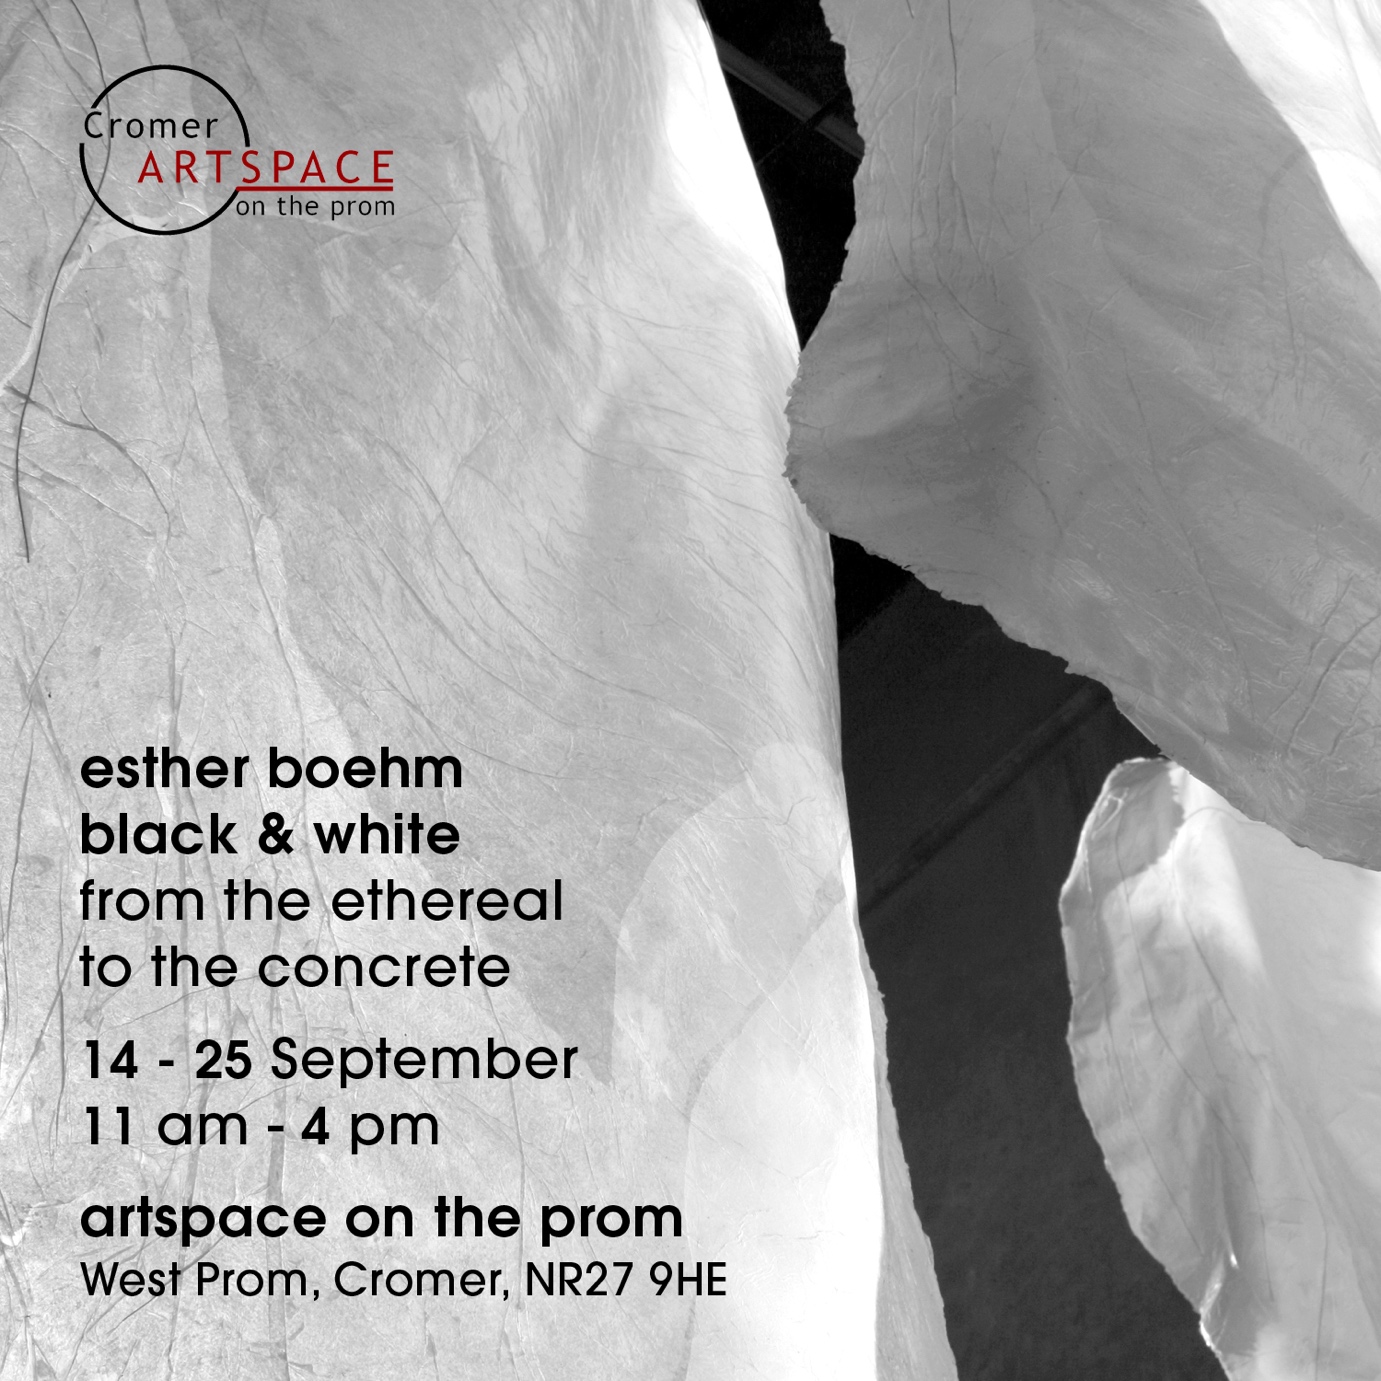 Black and White: From the Ethereal to the Concrete, Esther Boehm